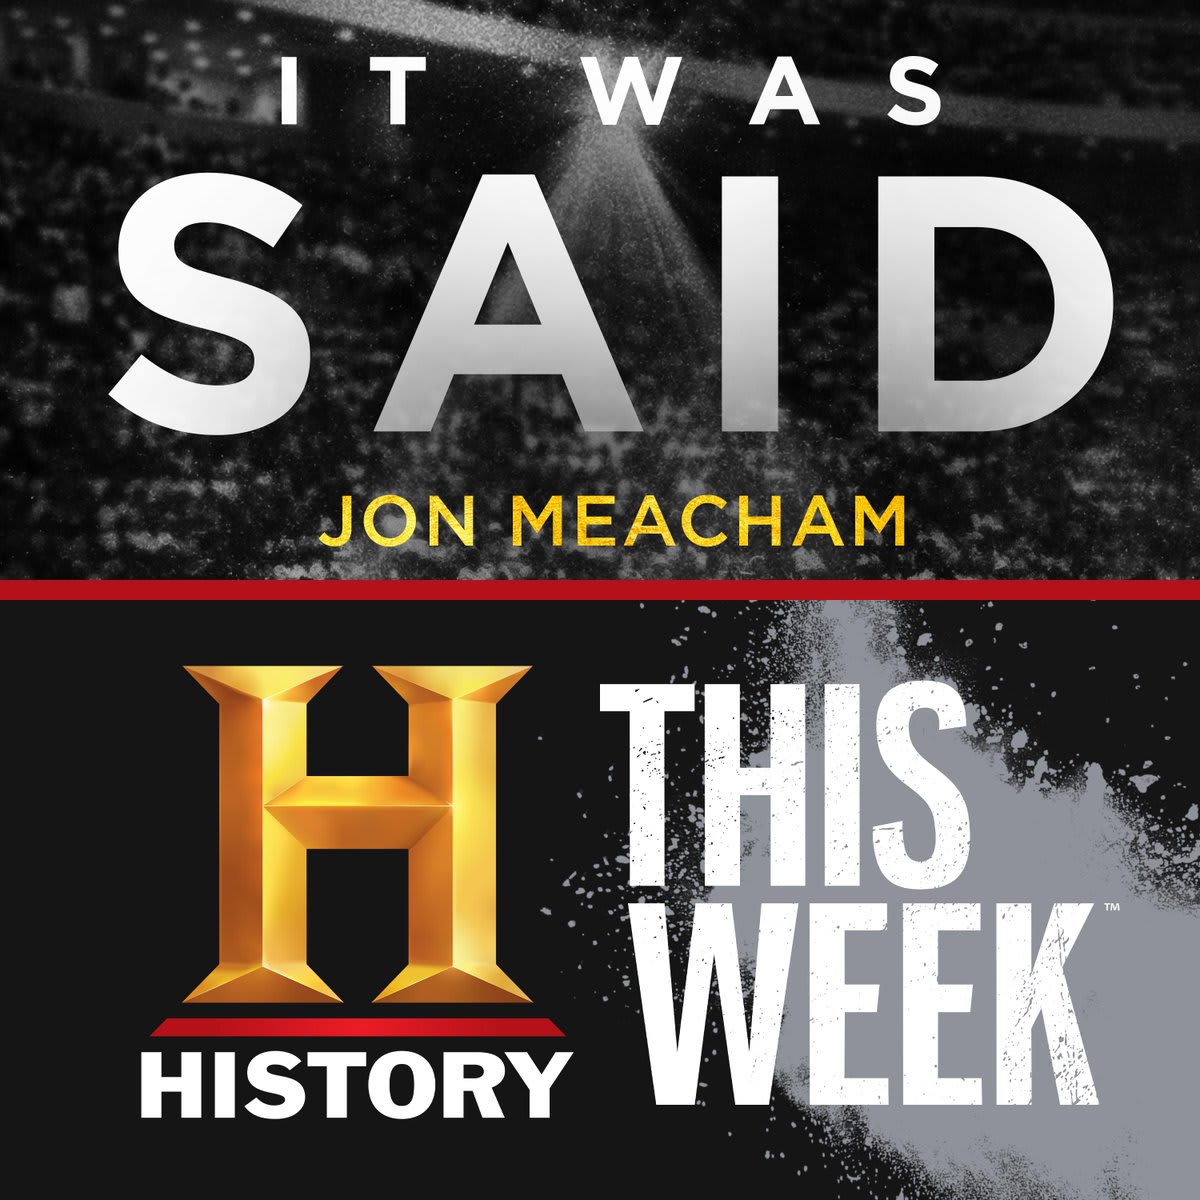 Congratulations to HistoryThisWeek and ItWasSaid podcasts on their Webby nominations for Best Podcast Series! Voting open until May 6th: